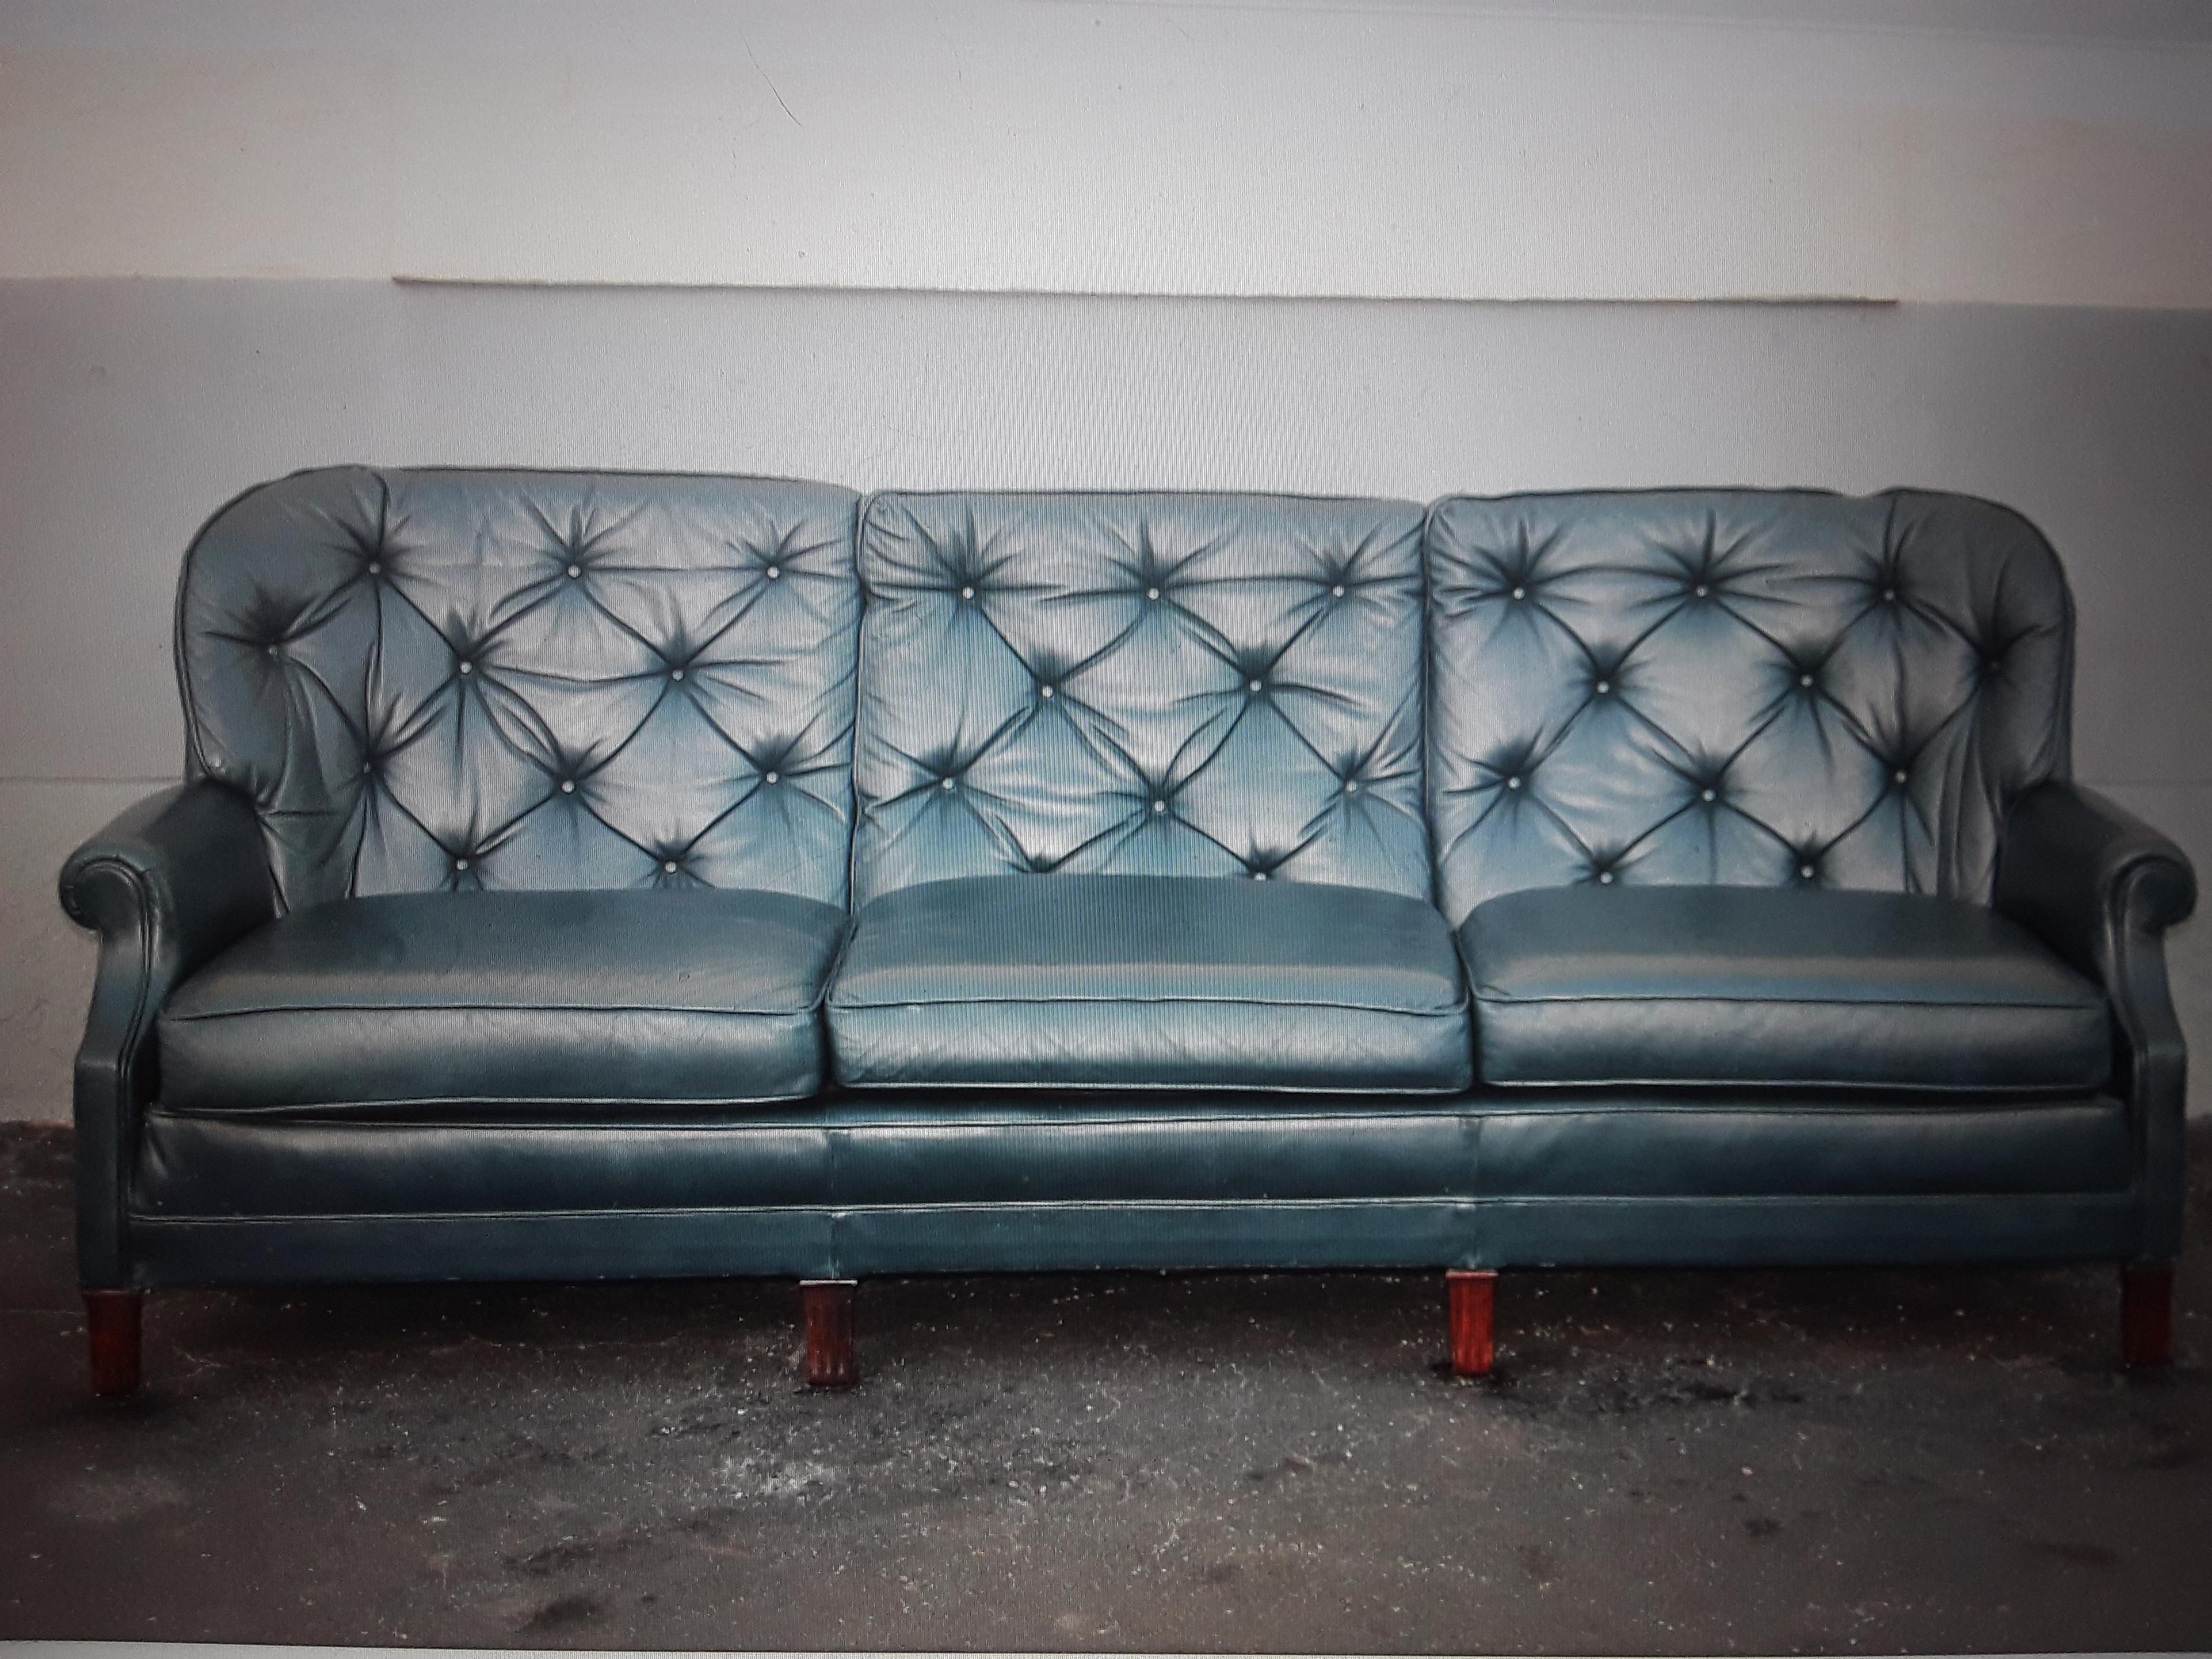 1960's Classic Mid Century Modern Blue Leather Chesterfield style Sofa. Beautiful blue leather. Miami estate purchase.